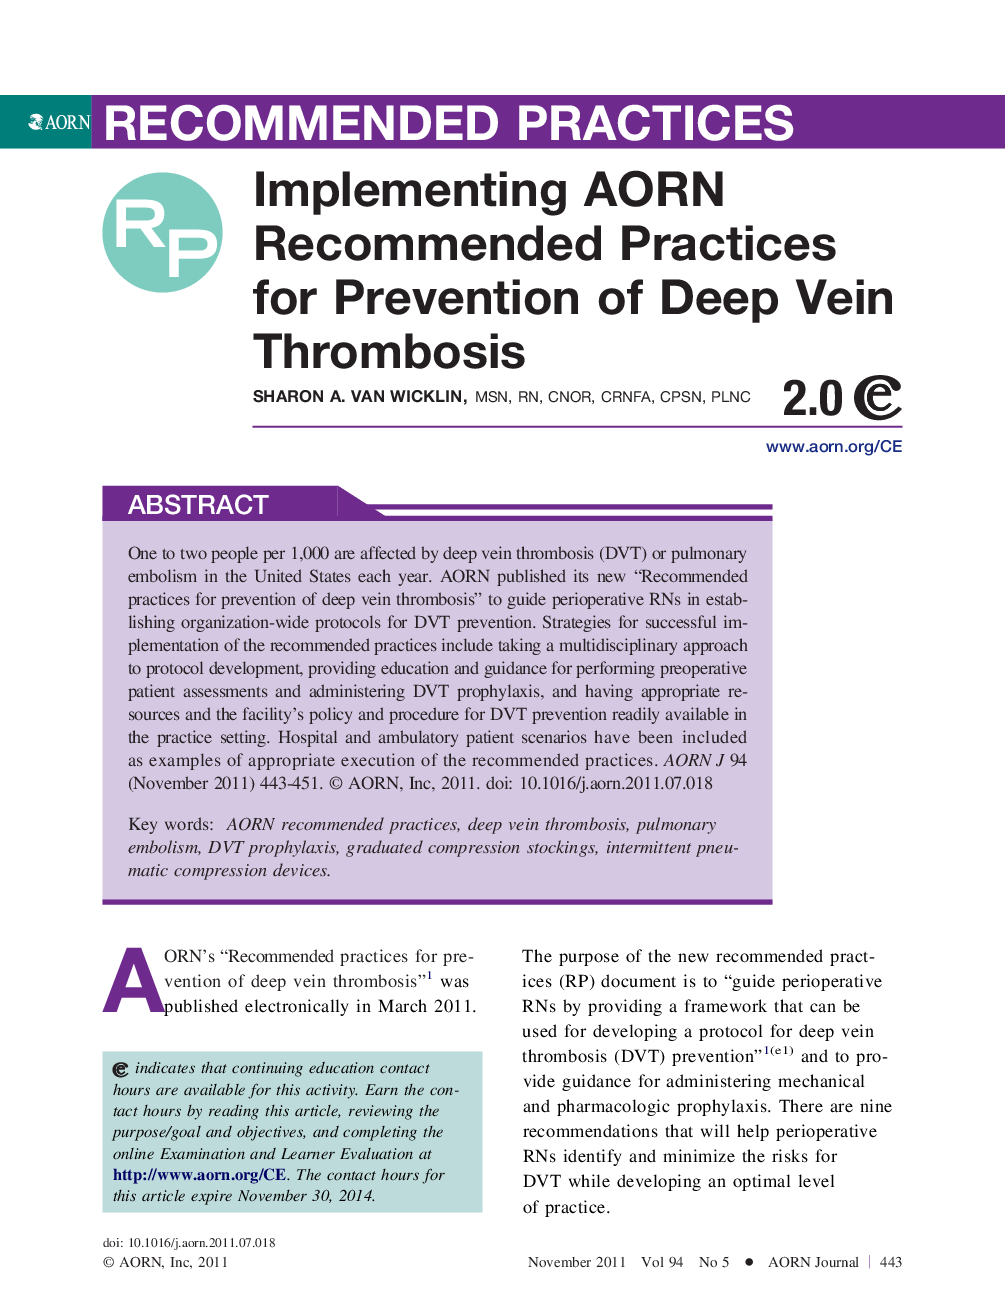 Implementing AORN Recommended Practices for Prevention of Deep Vein Thrombosis